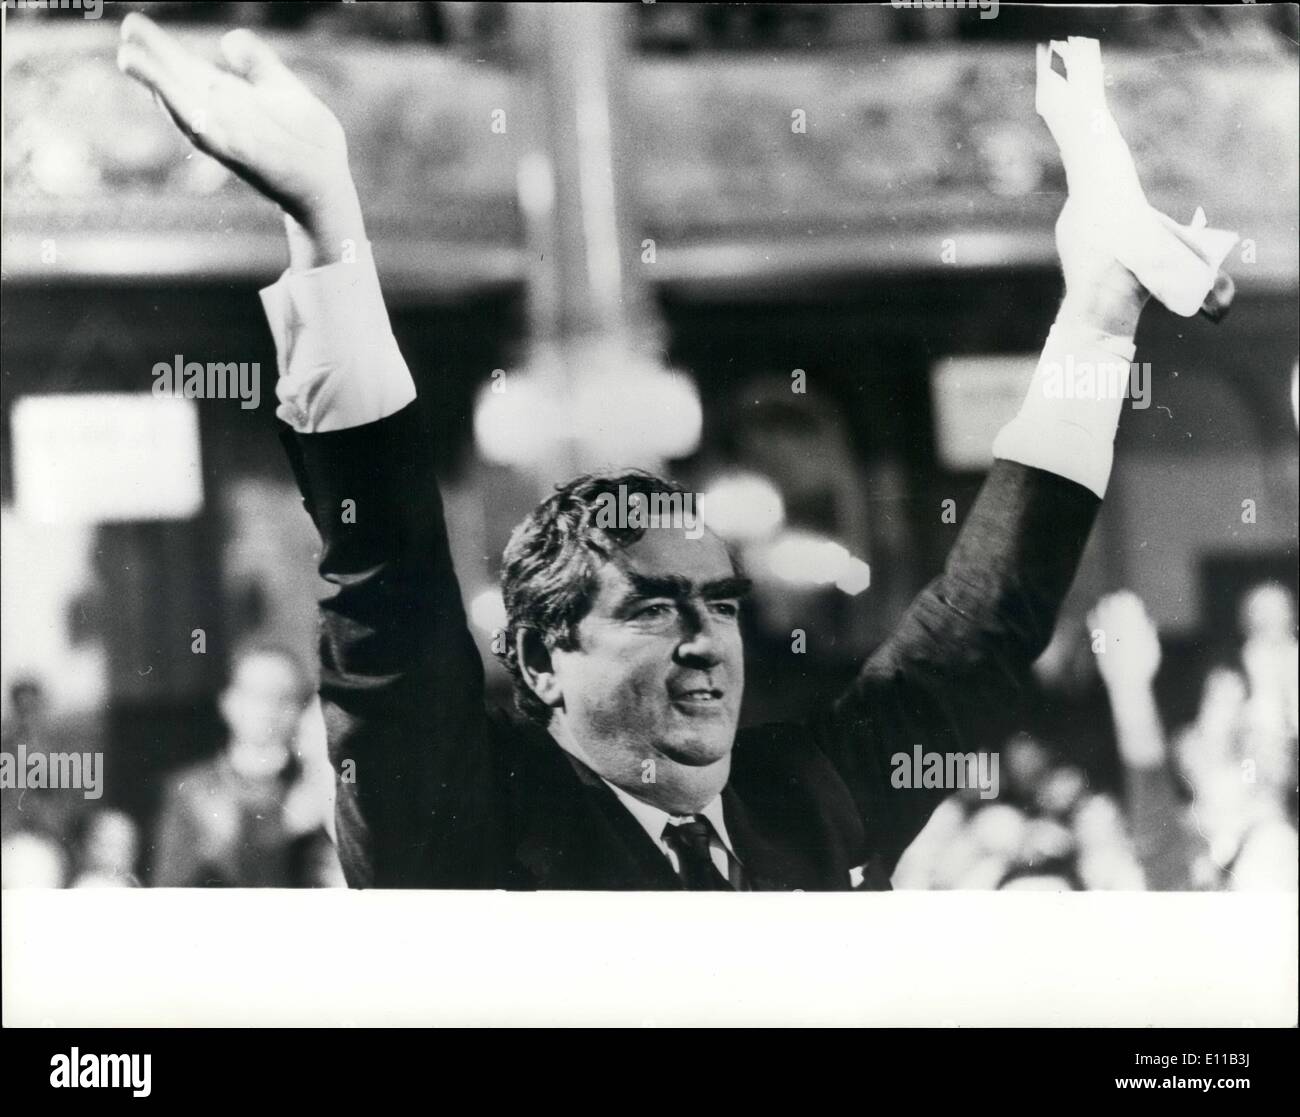 Oct. 10, 1976 - Chancellor Healey Wins labour Backing For The Defence Of Sterling: Mr. Denis Healey, the Chancellor of the Exchequer, faced left-wing critics at the Labour Party annual conference in Blackpool yesterday with a blunt defence of the Government's economic strategy and measures taken this week to support the pound. After he had out-shouted the jears of the Left-wing, the Chancellor, who had flown to Blackpool to make an impassioned demand to the party for loyalty in his defence of sterling, won the majority support. photo shows. Mr Stock Photo